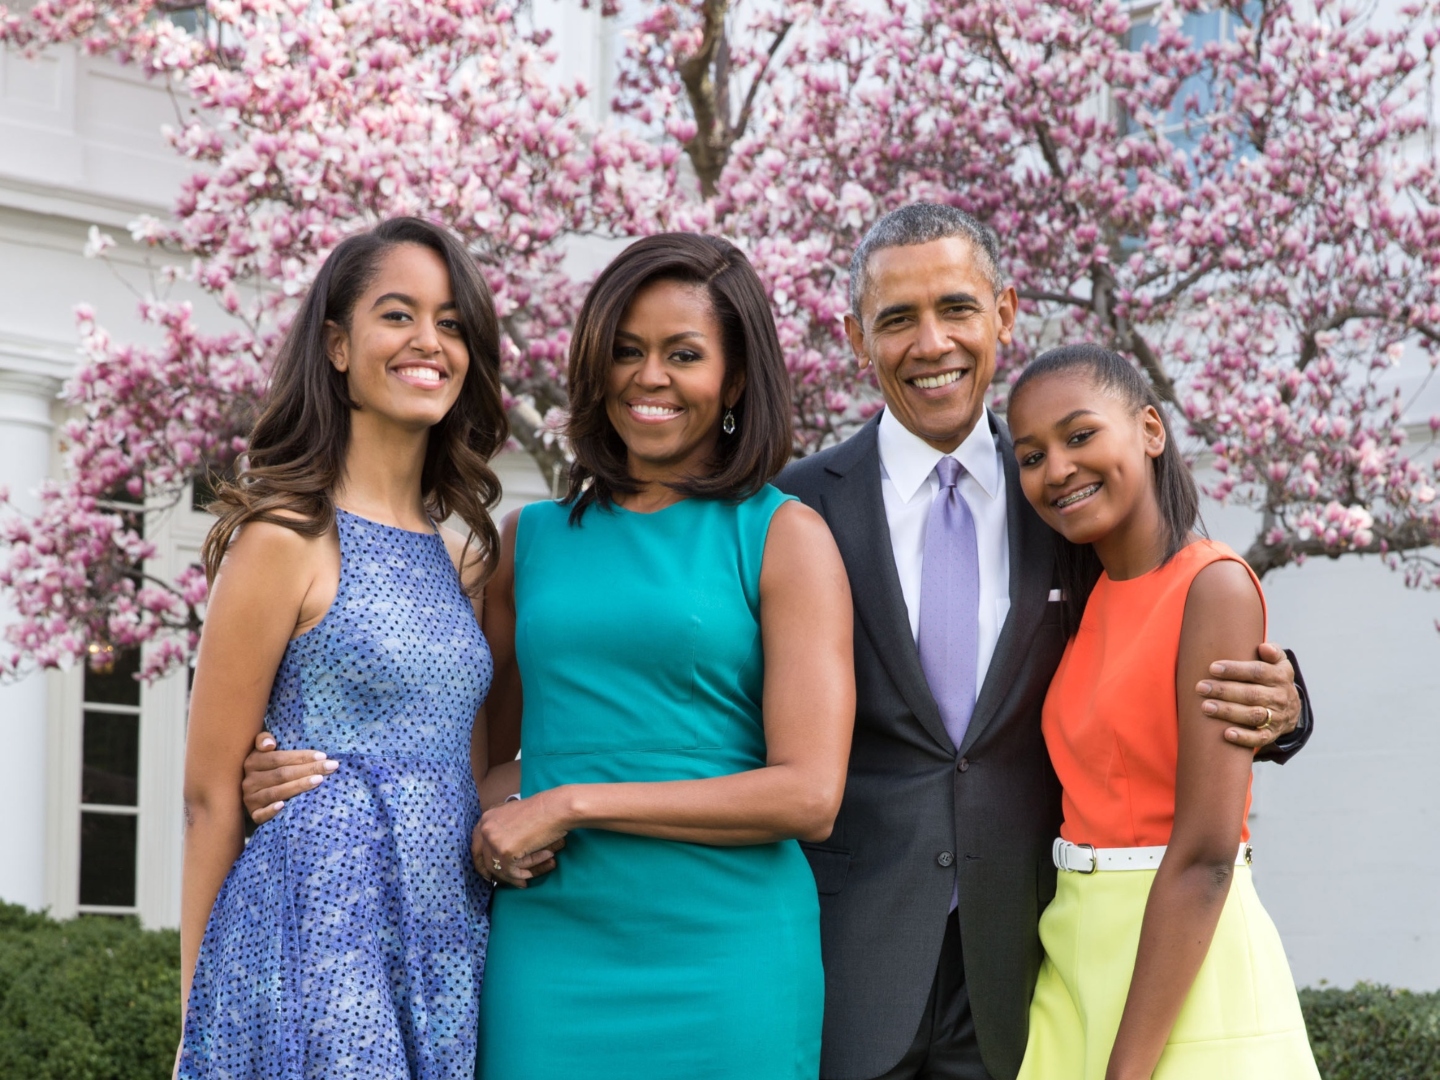 Obama Family photo in the White House Rose Garden, Easter Sunday, April 5, 2015. L-R: Malia, First Lady Michelle, the President, and Sasha with dogs Sunny and Bo. (BSLOC_2015_13_139). For Editorial Use Only